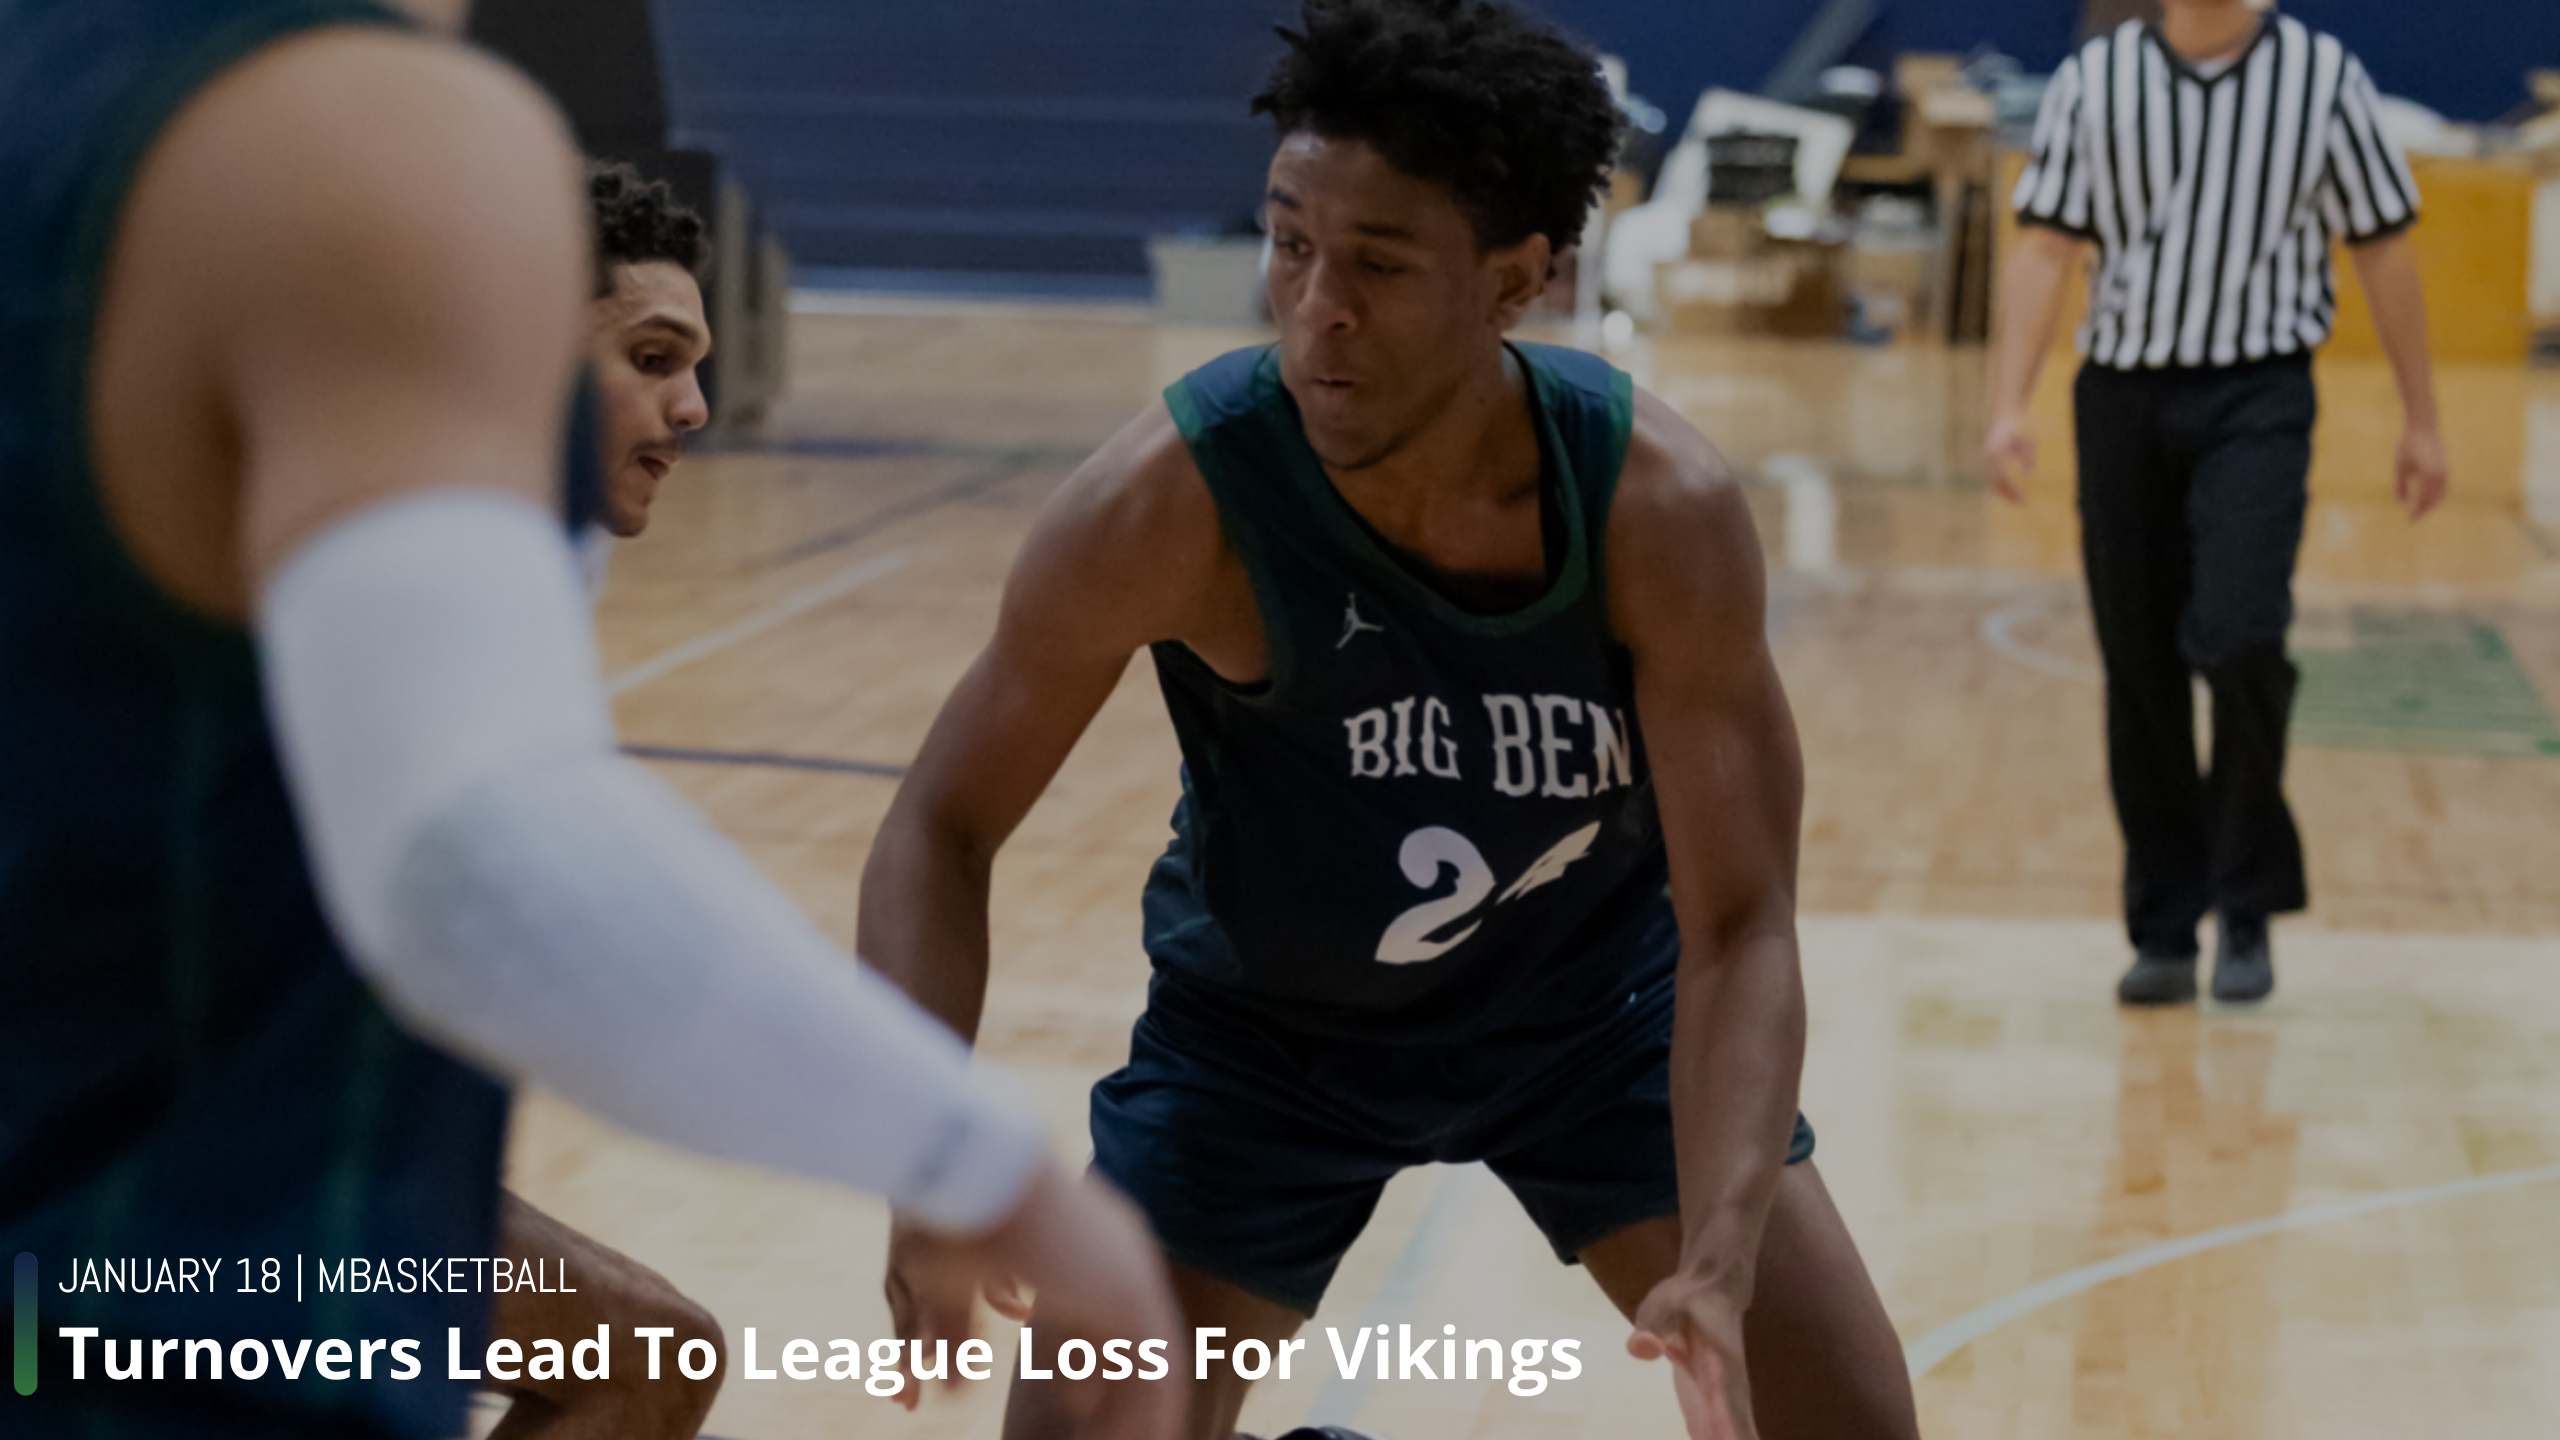 Turnovers Lead To League Loss For Vikings